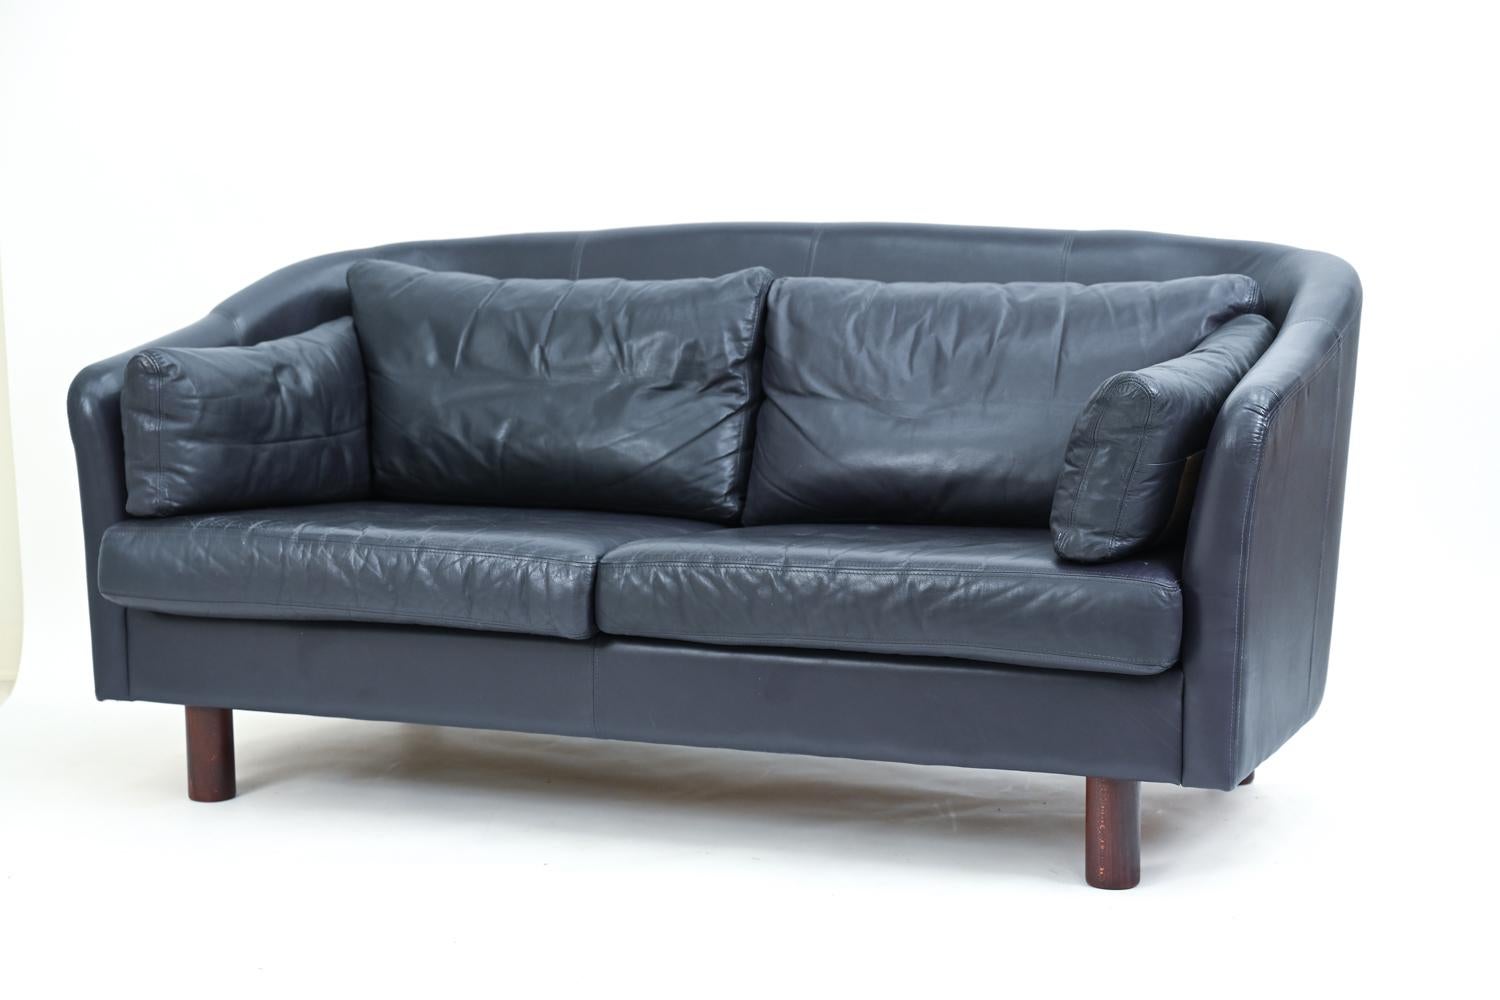 Pair of Swedish Modern Leather Sofas by Dux, c. 1970's 12